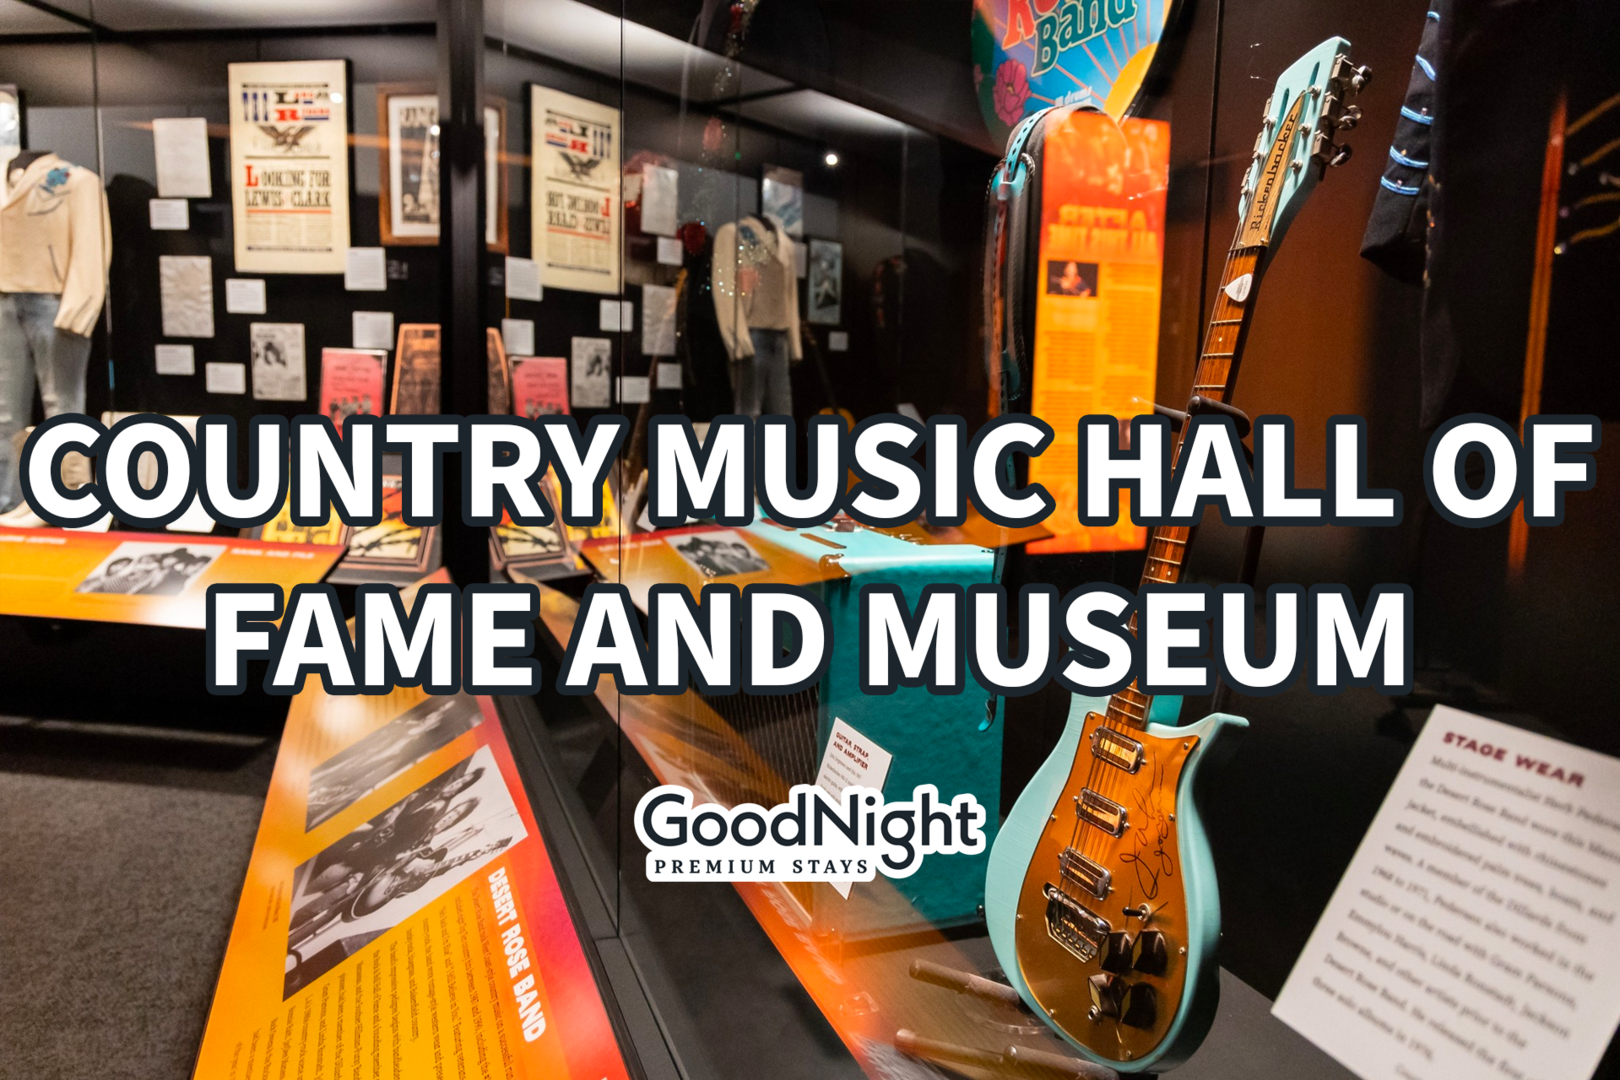 8 mins: Country Music Hall of Fame and Museum